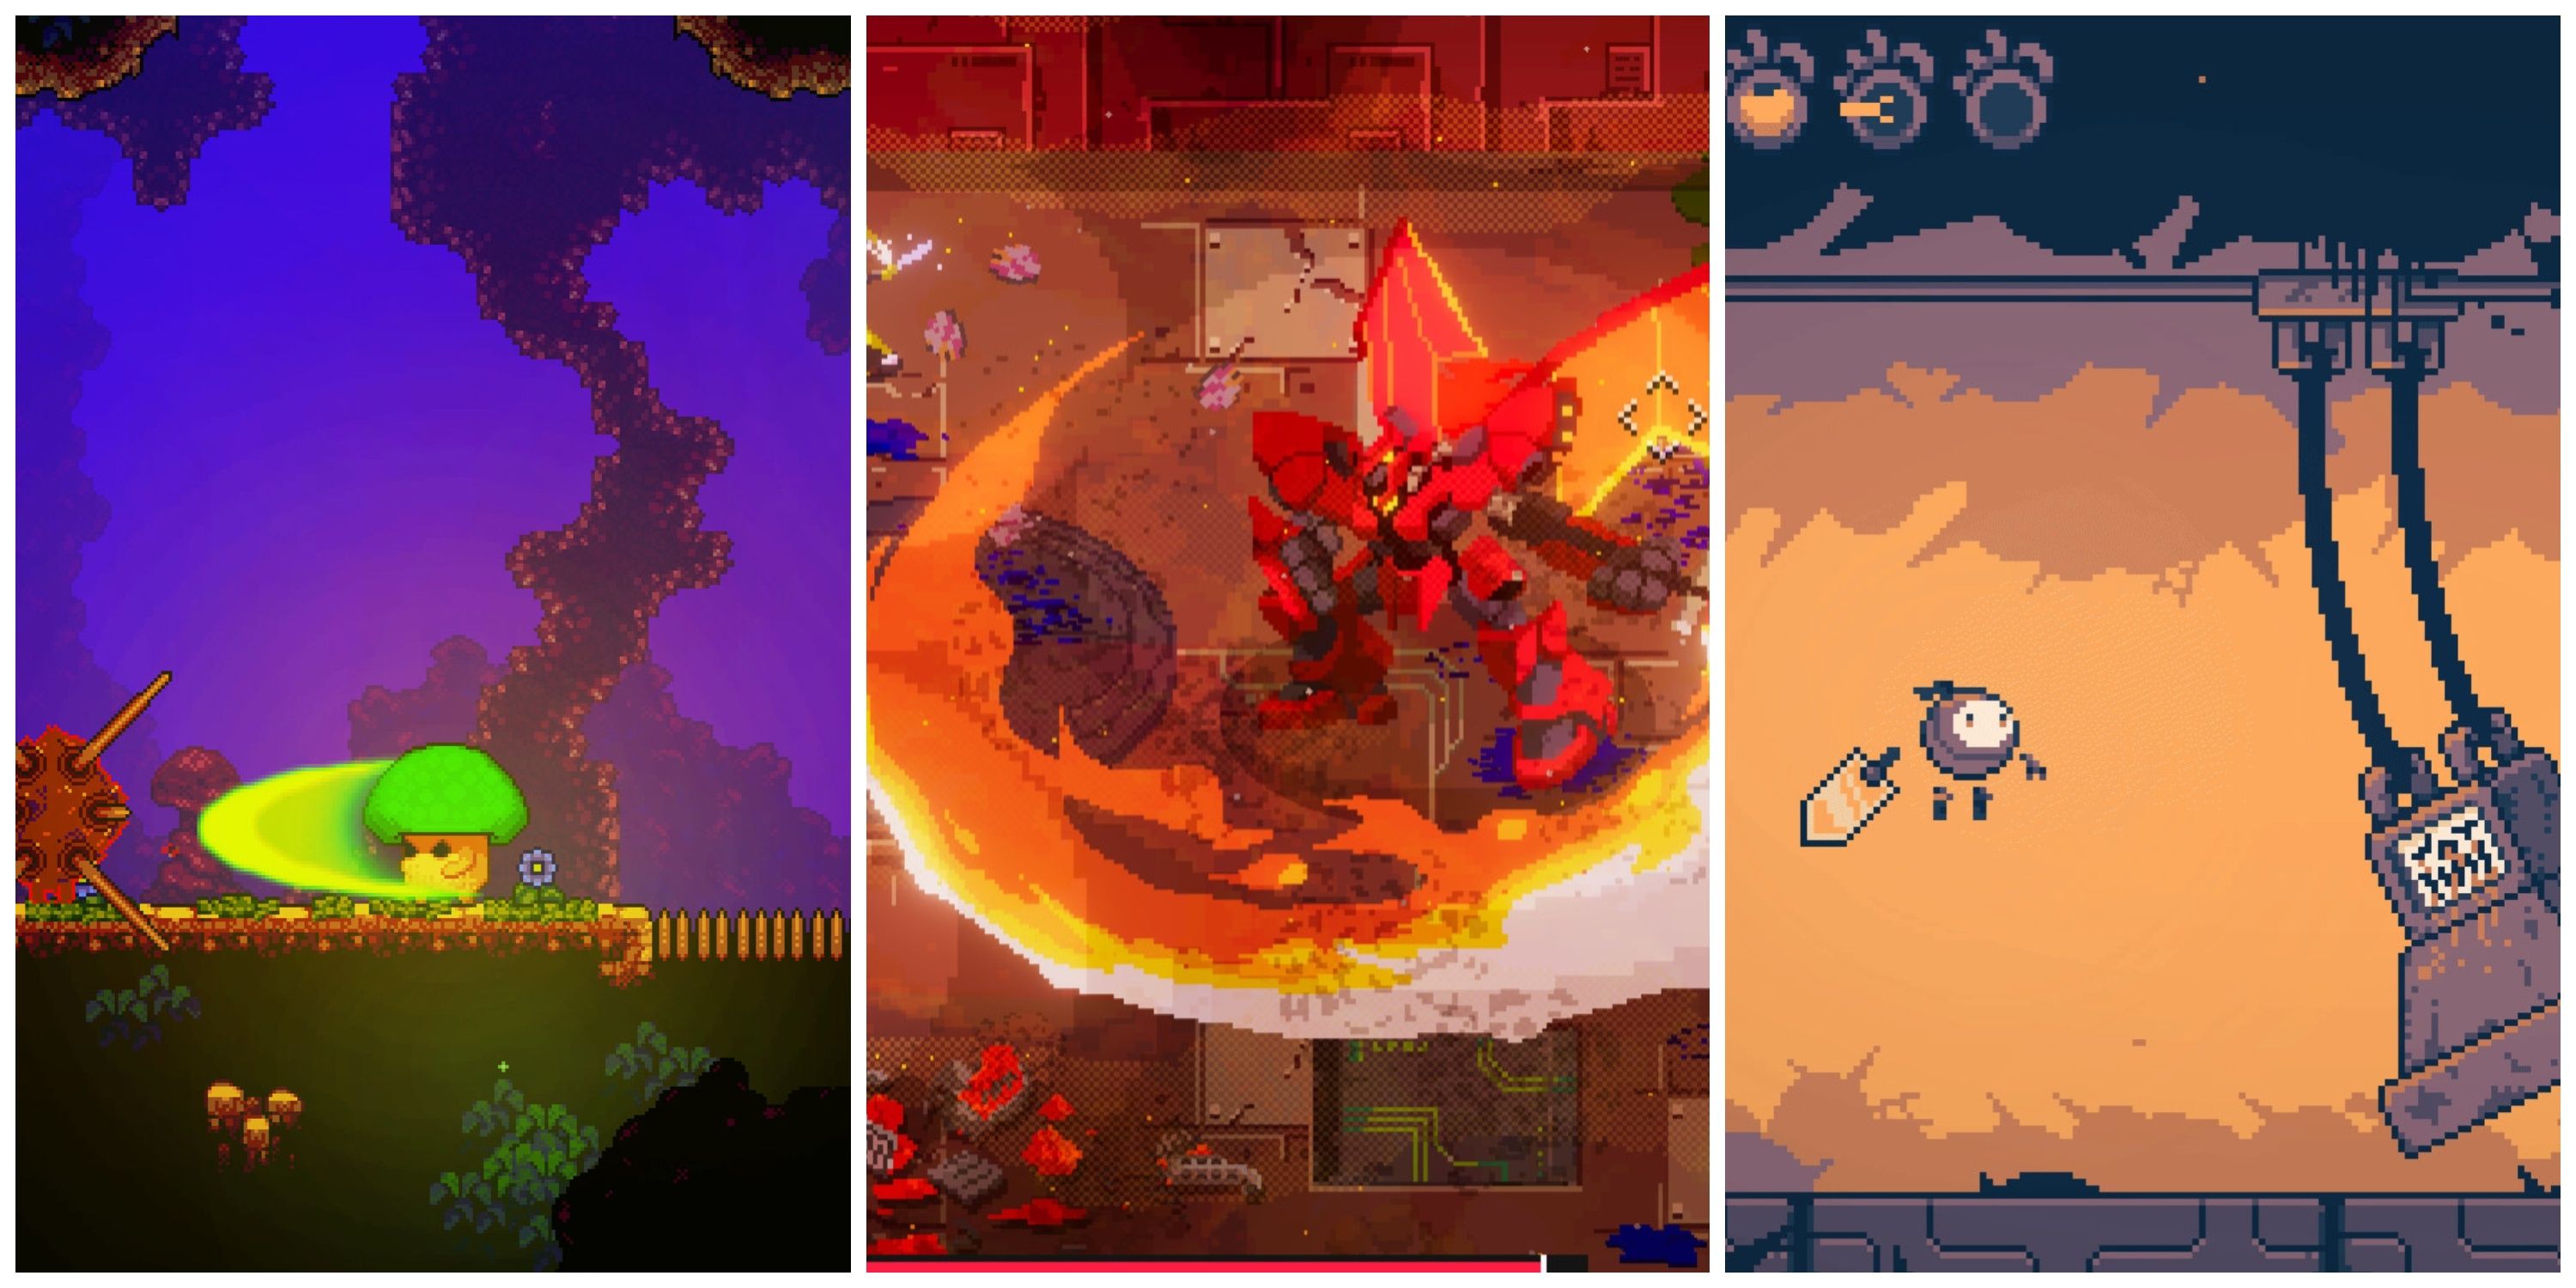 Best Indie Metroidvania Games (Featured Image) - Lone Fungus + Unsighted + Haiku, The Robot